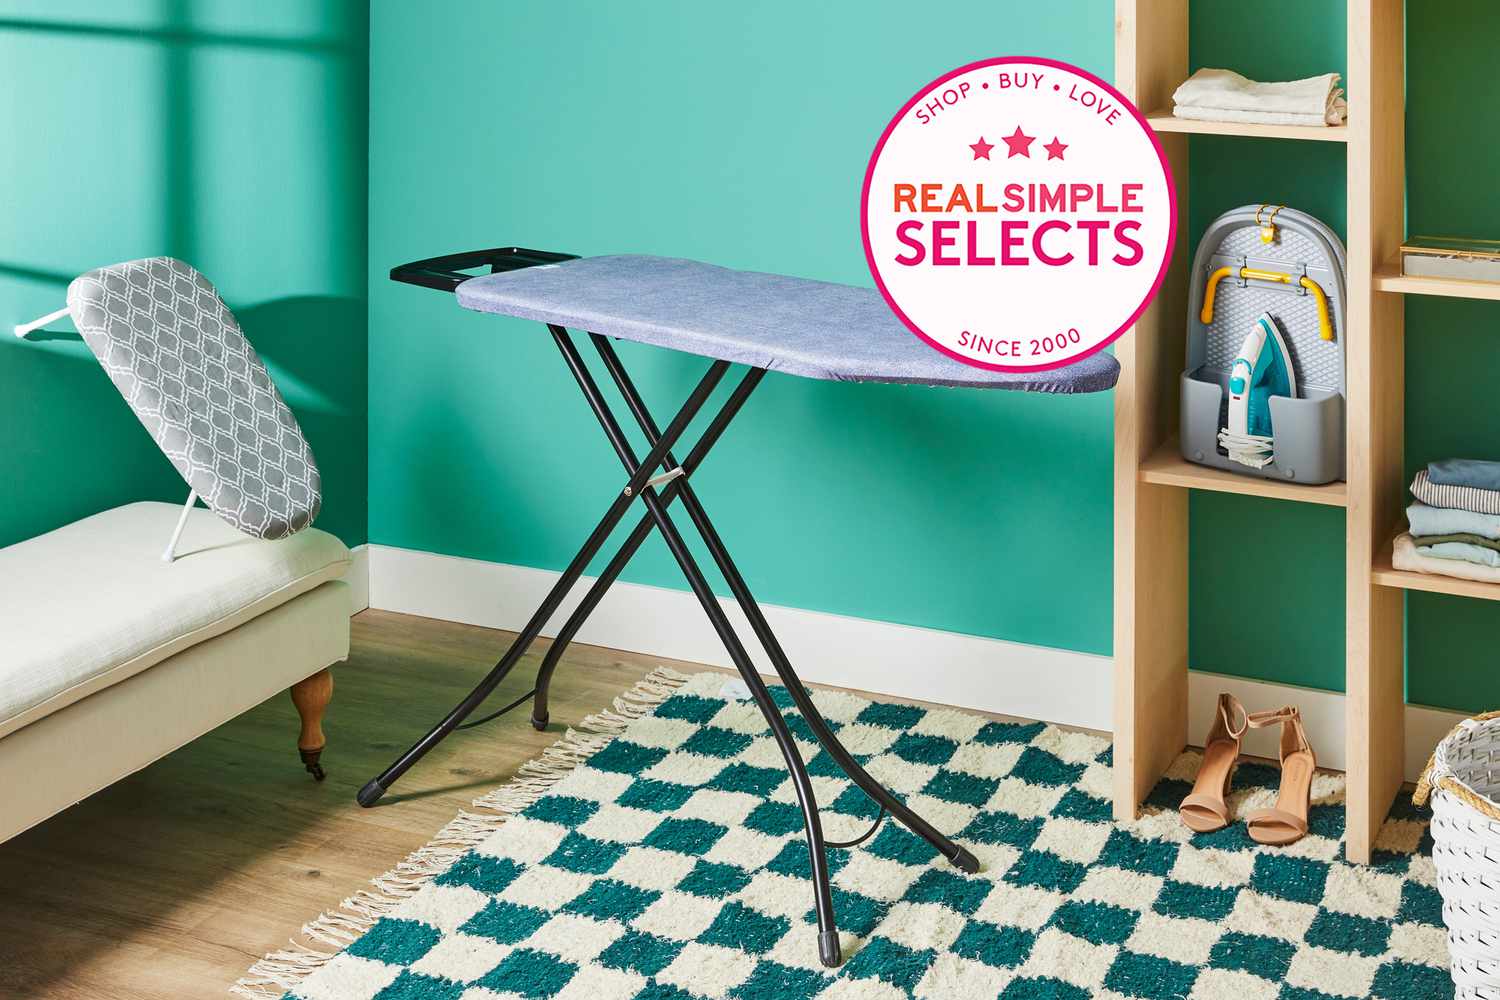 A variety of ironing boards in a green painted room with a checkered print rug